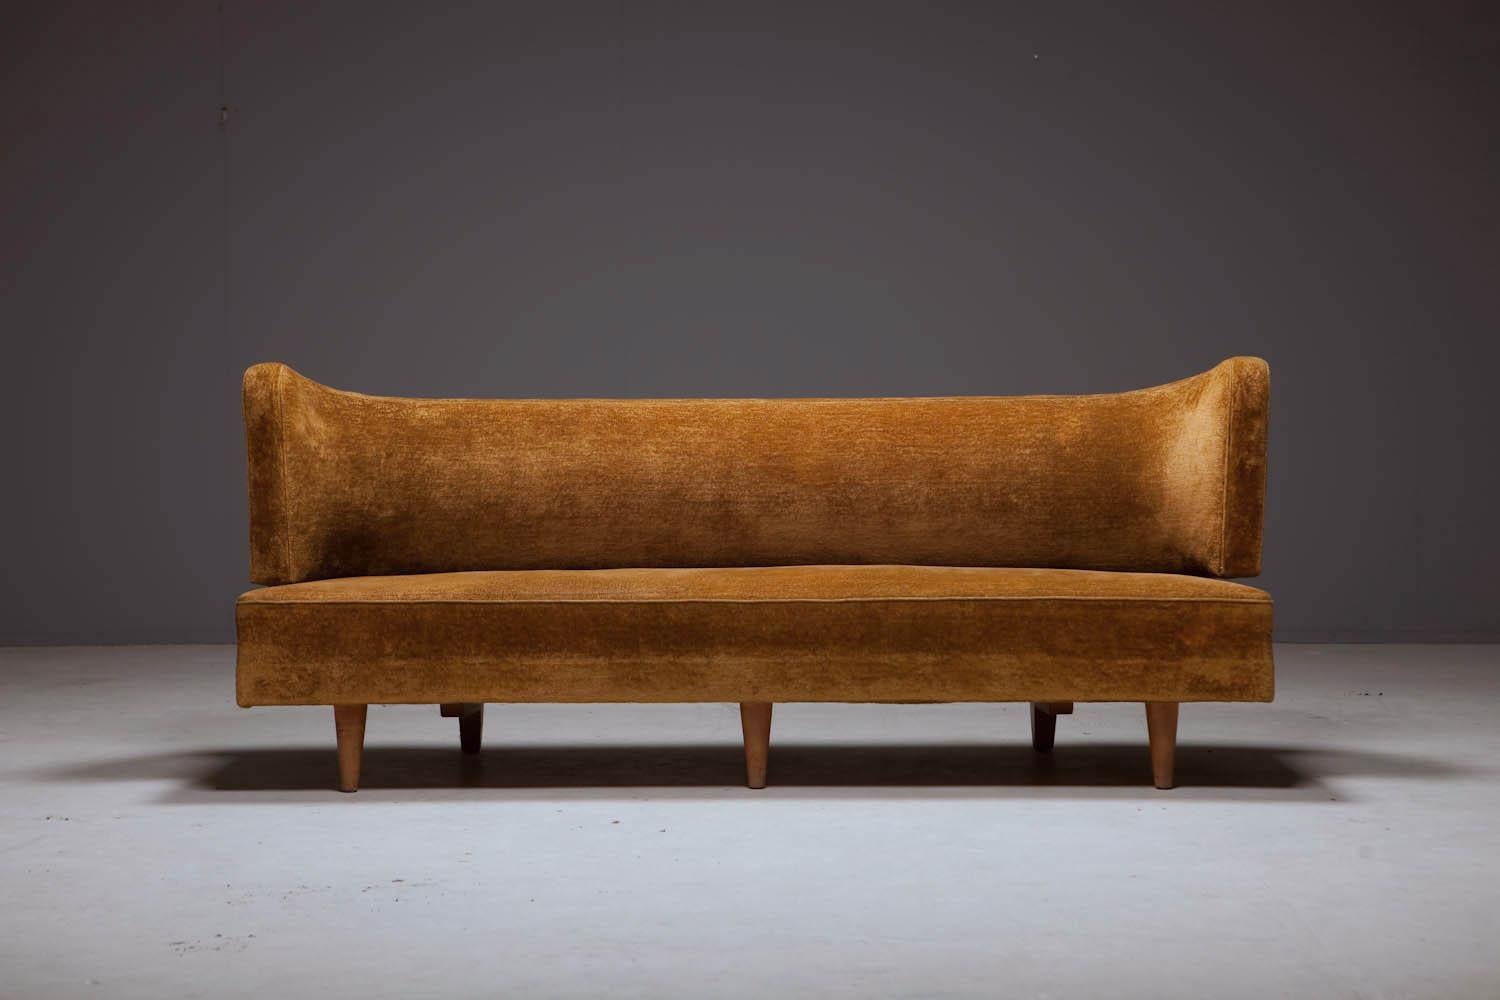 Very important unique museum quality Theo Ruth sofa.
There is only one-piece on this planet and it was designed by Theo Ruth for Artifort Maastricht. This sofa was specially designed for the 1950 ‘Furniture and Art Fair’ booth for Artifort in